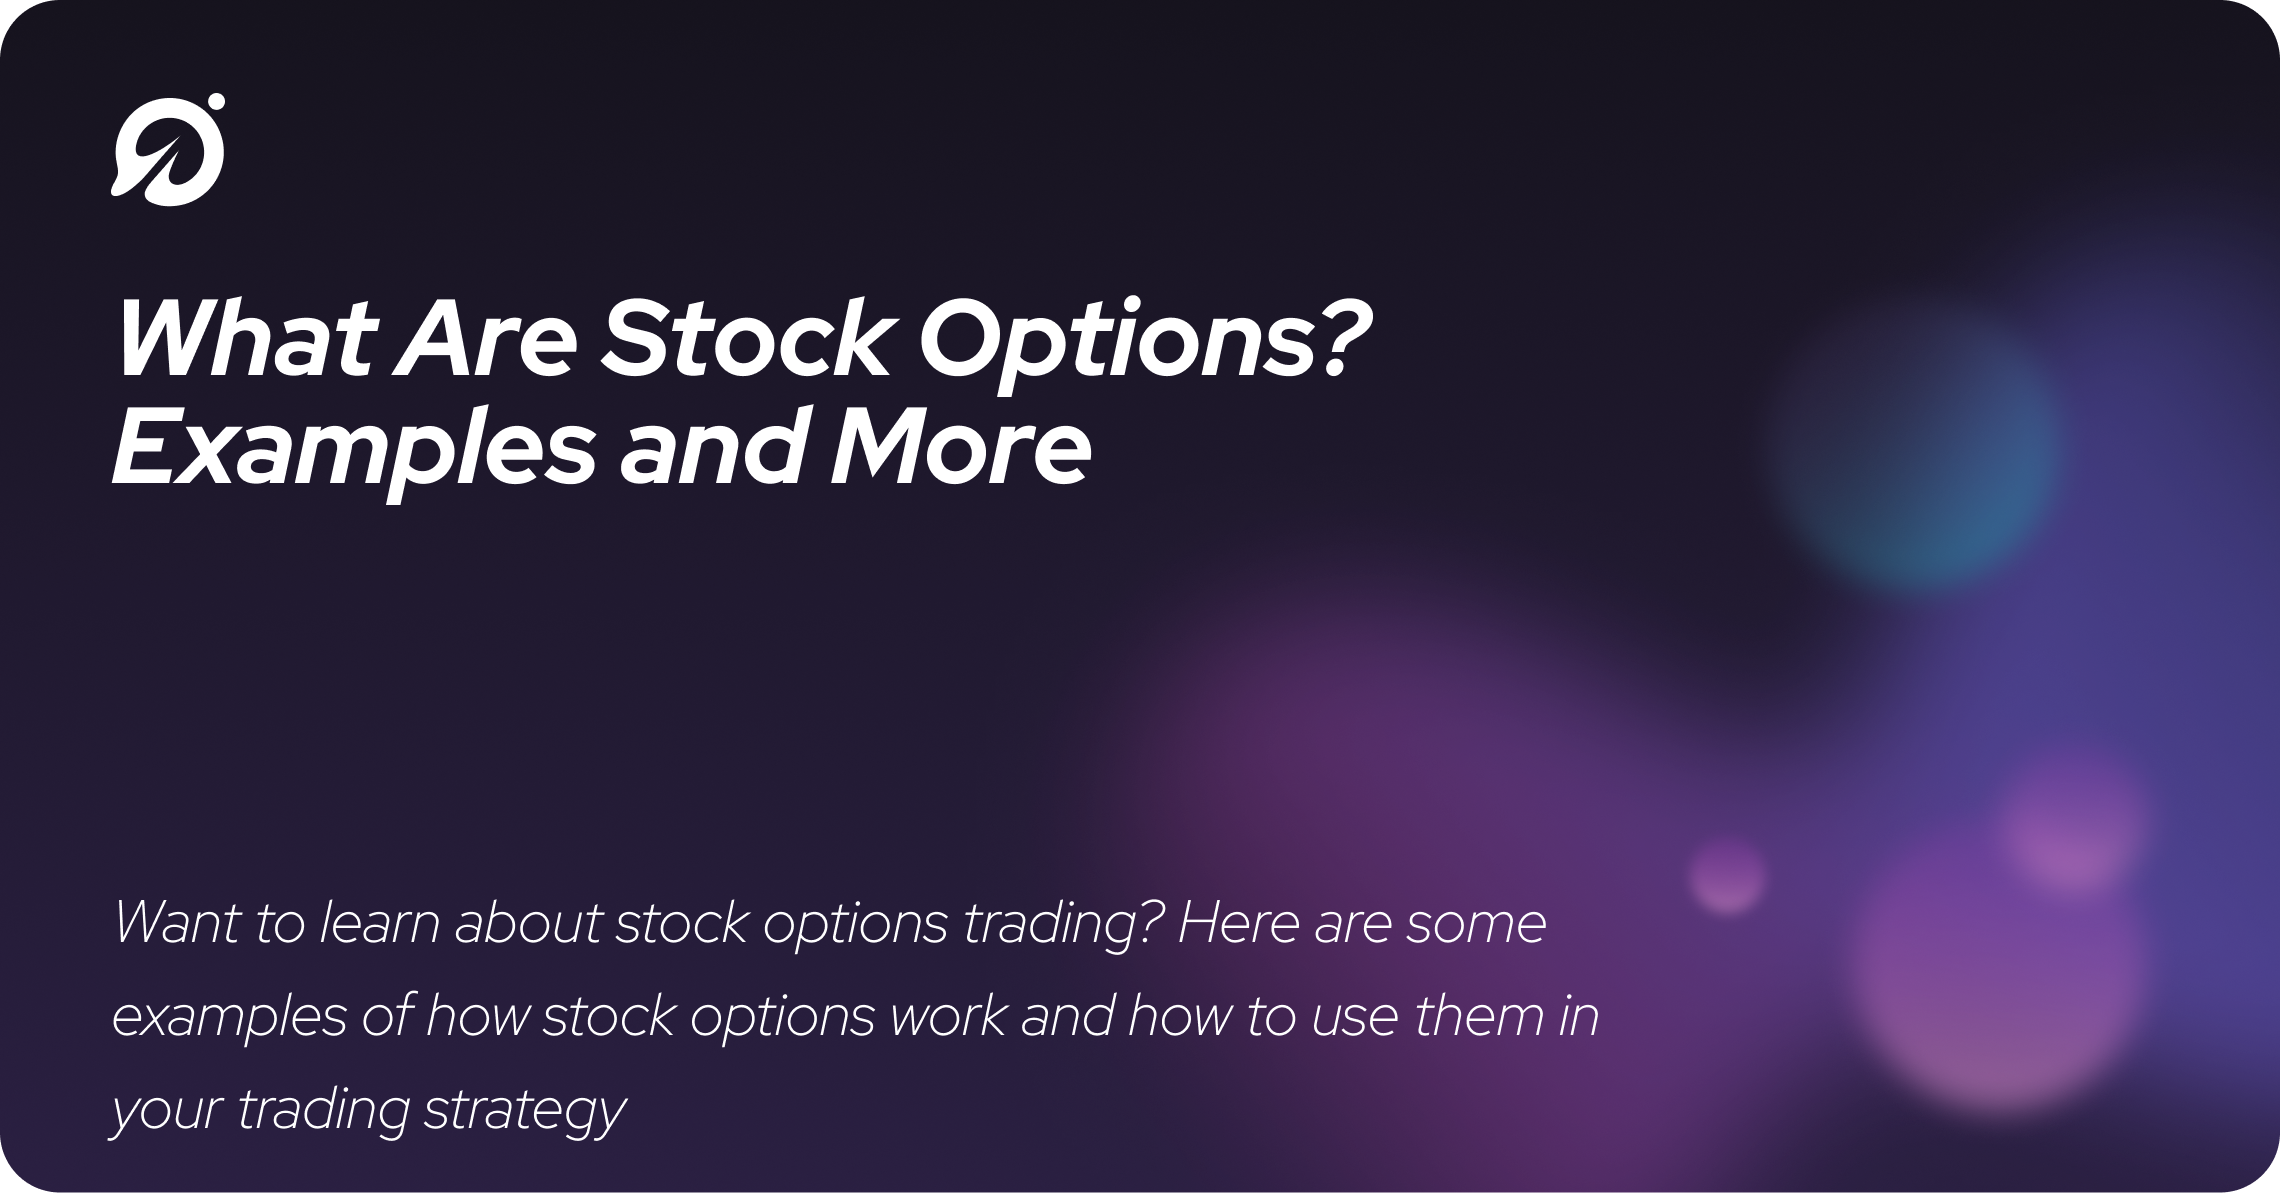 What Are Stock Options? Examples and More